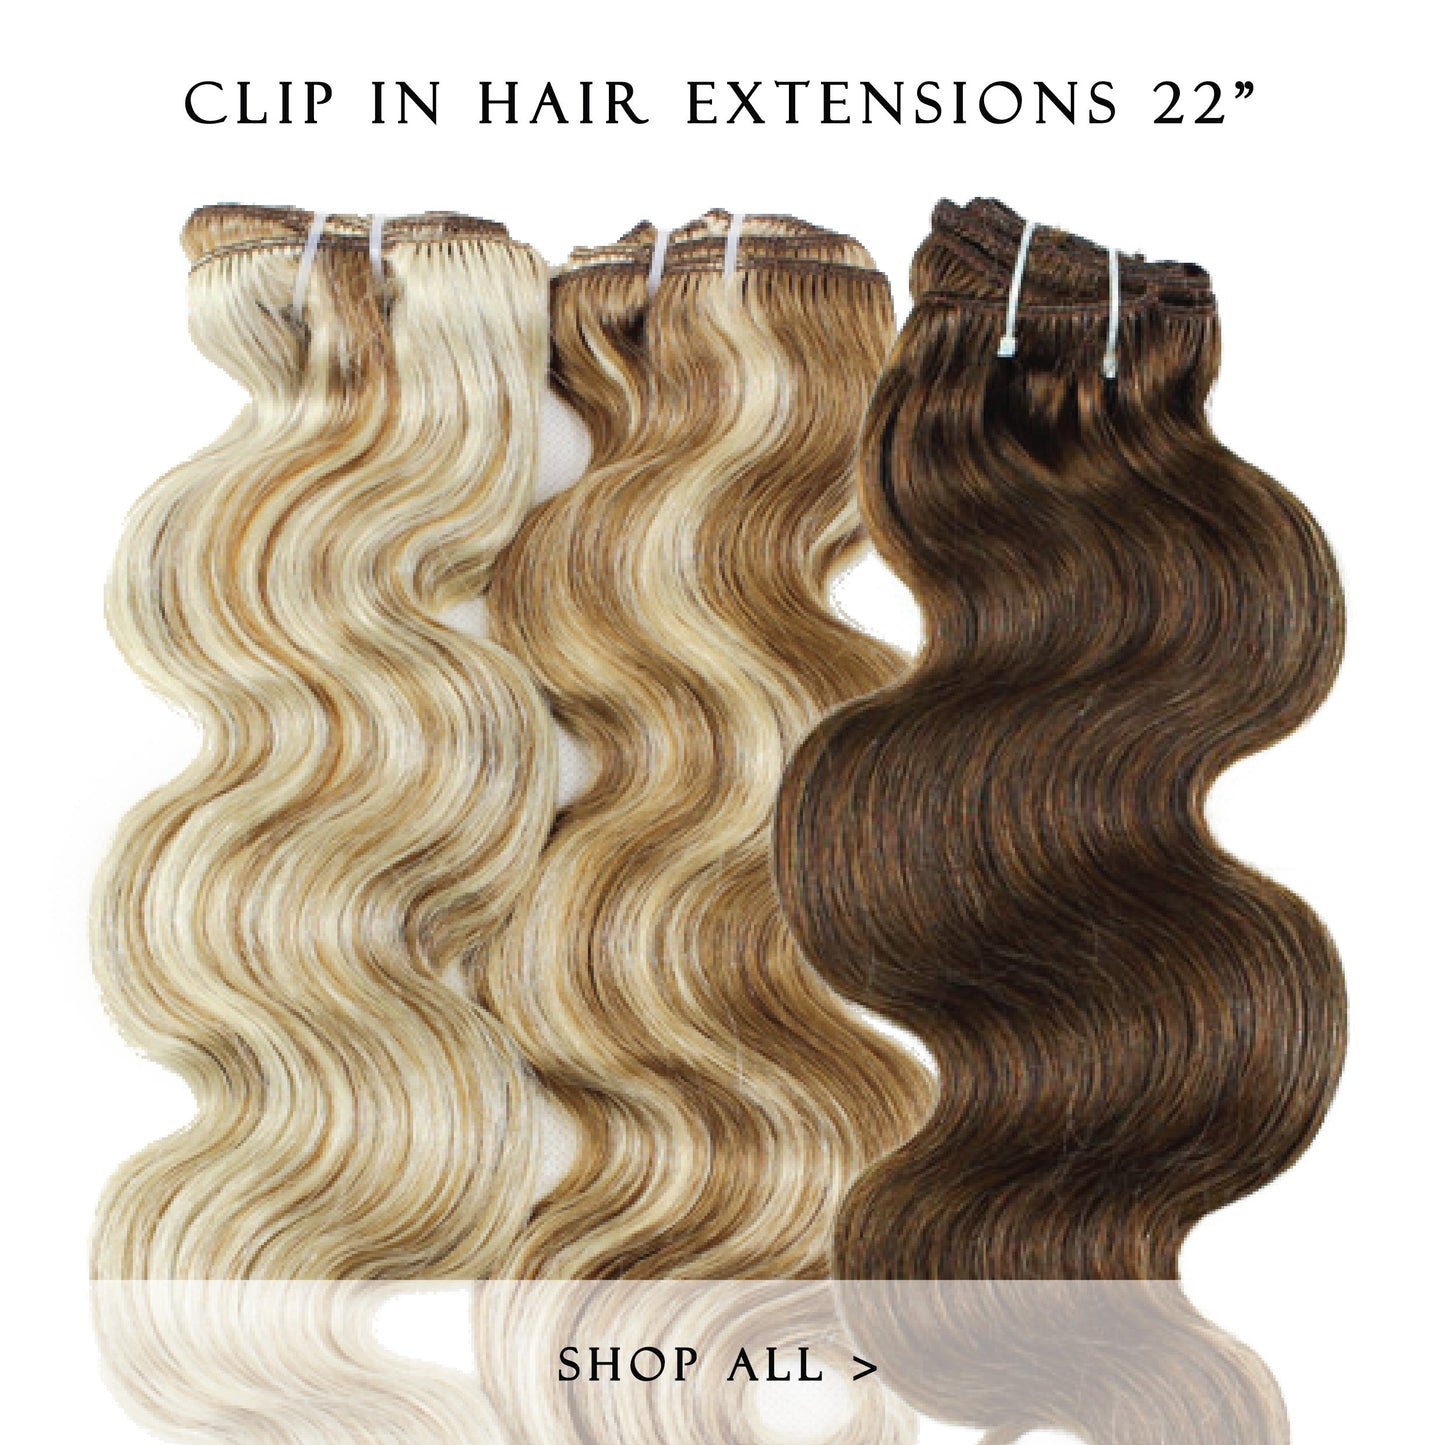 creme brulee blonde #22 clip in hair extensions 22inch classic